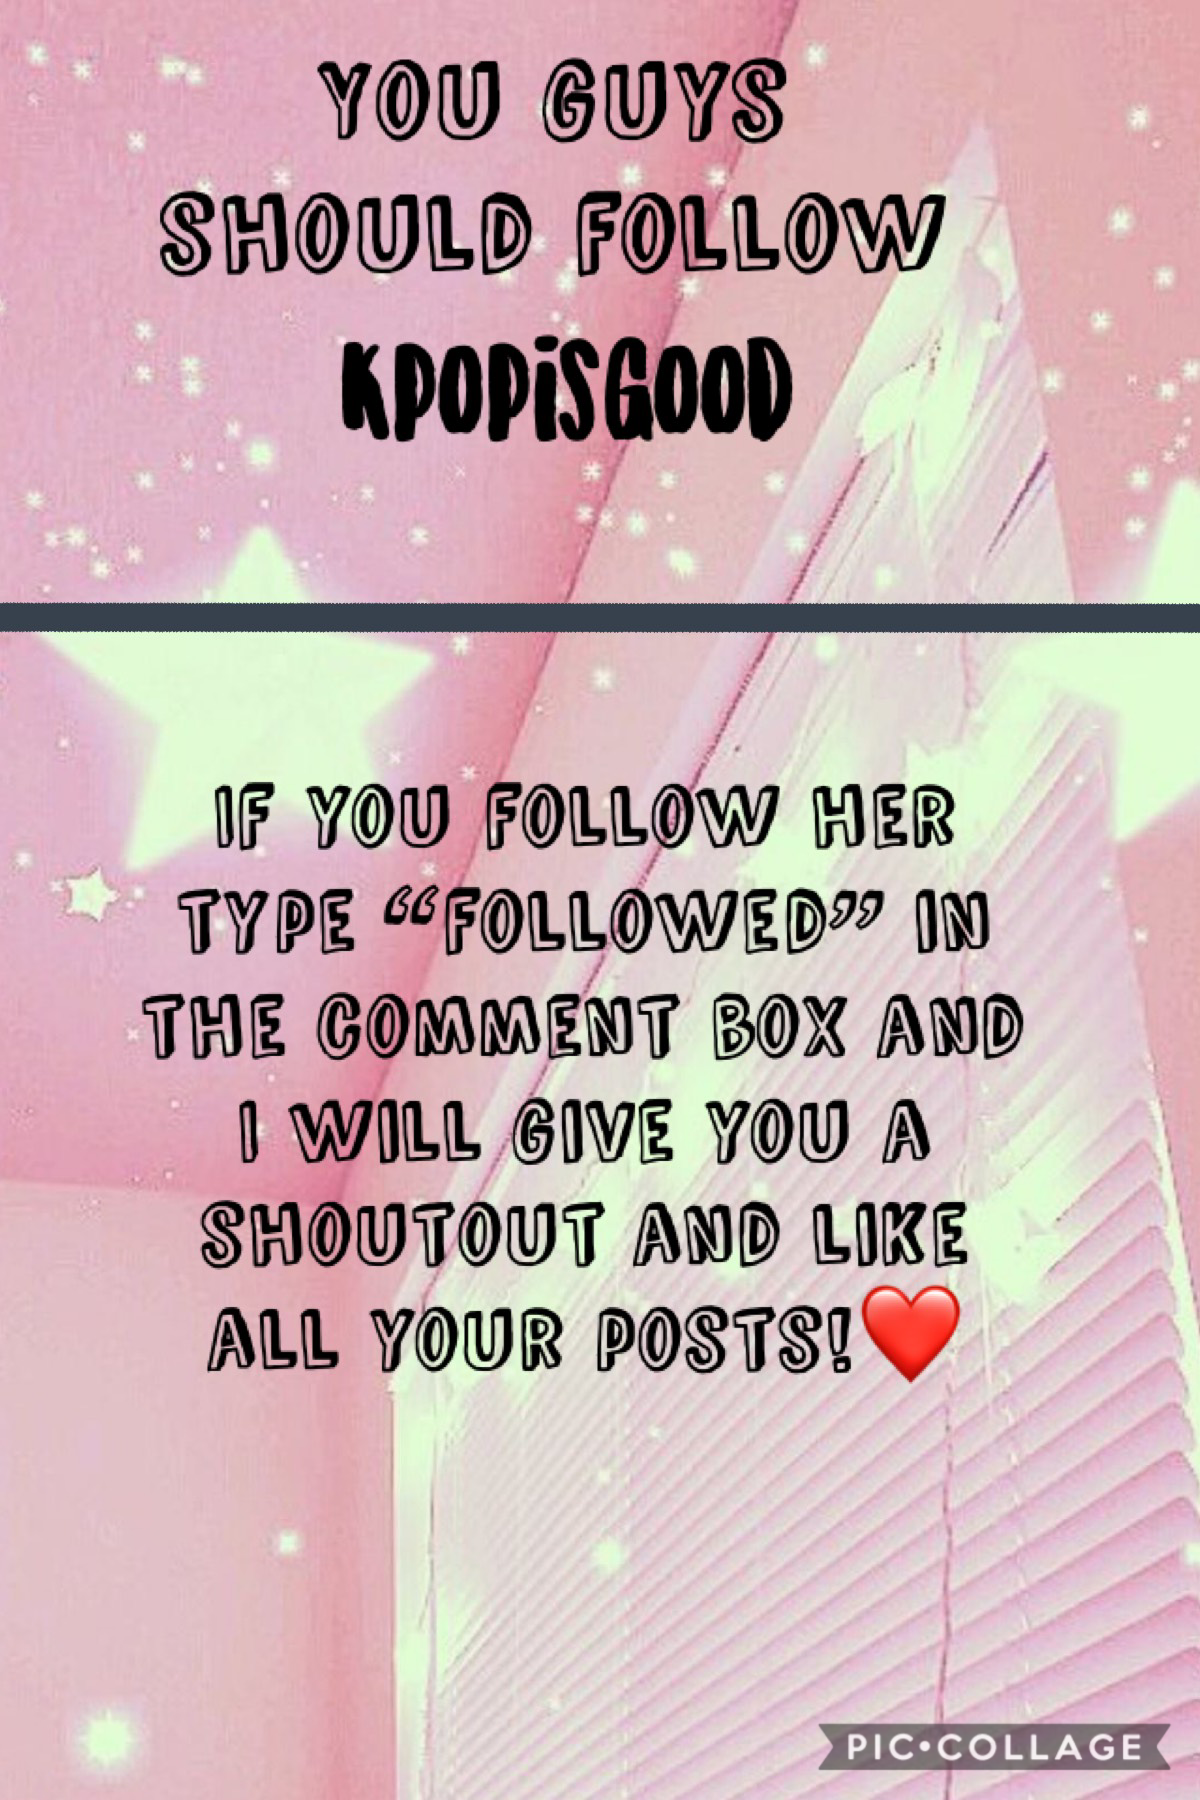 Follow Kpopisgood and follow the directions in the post!❤️